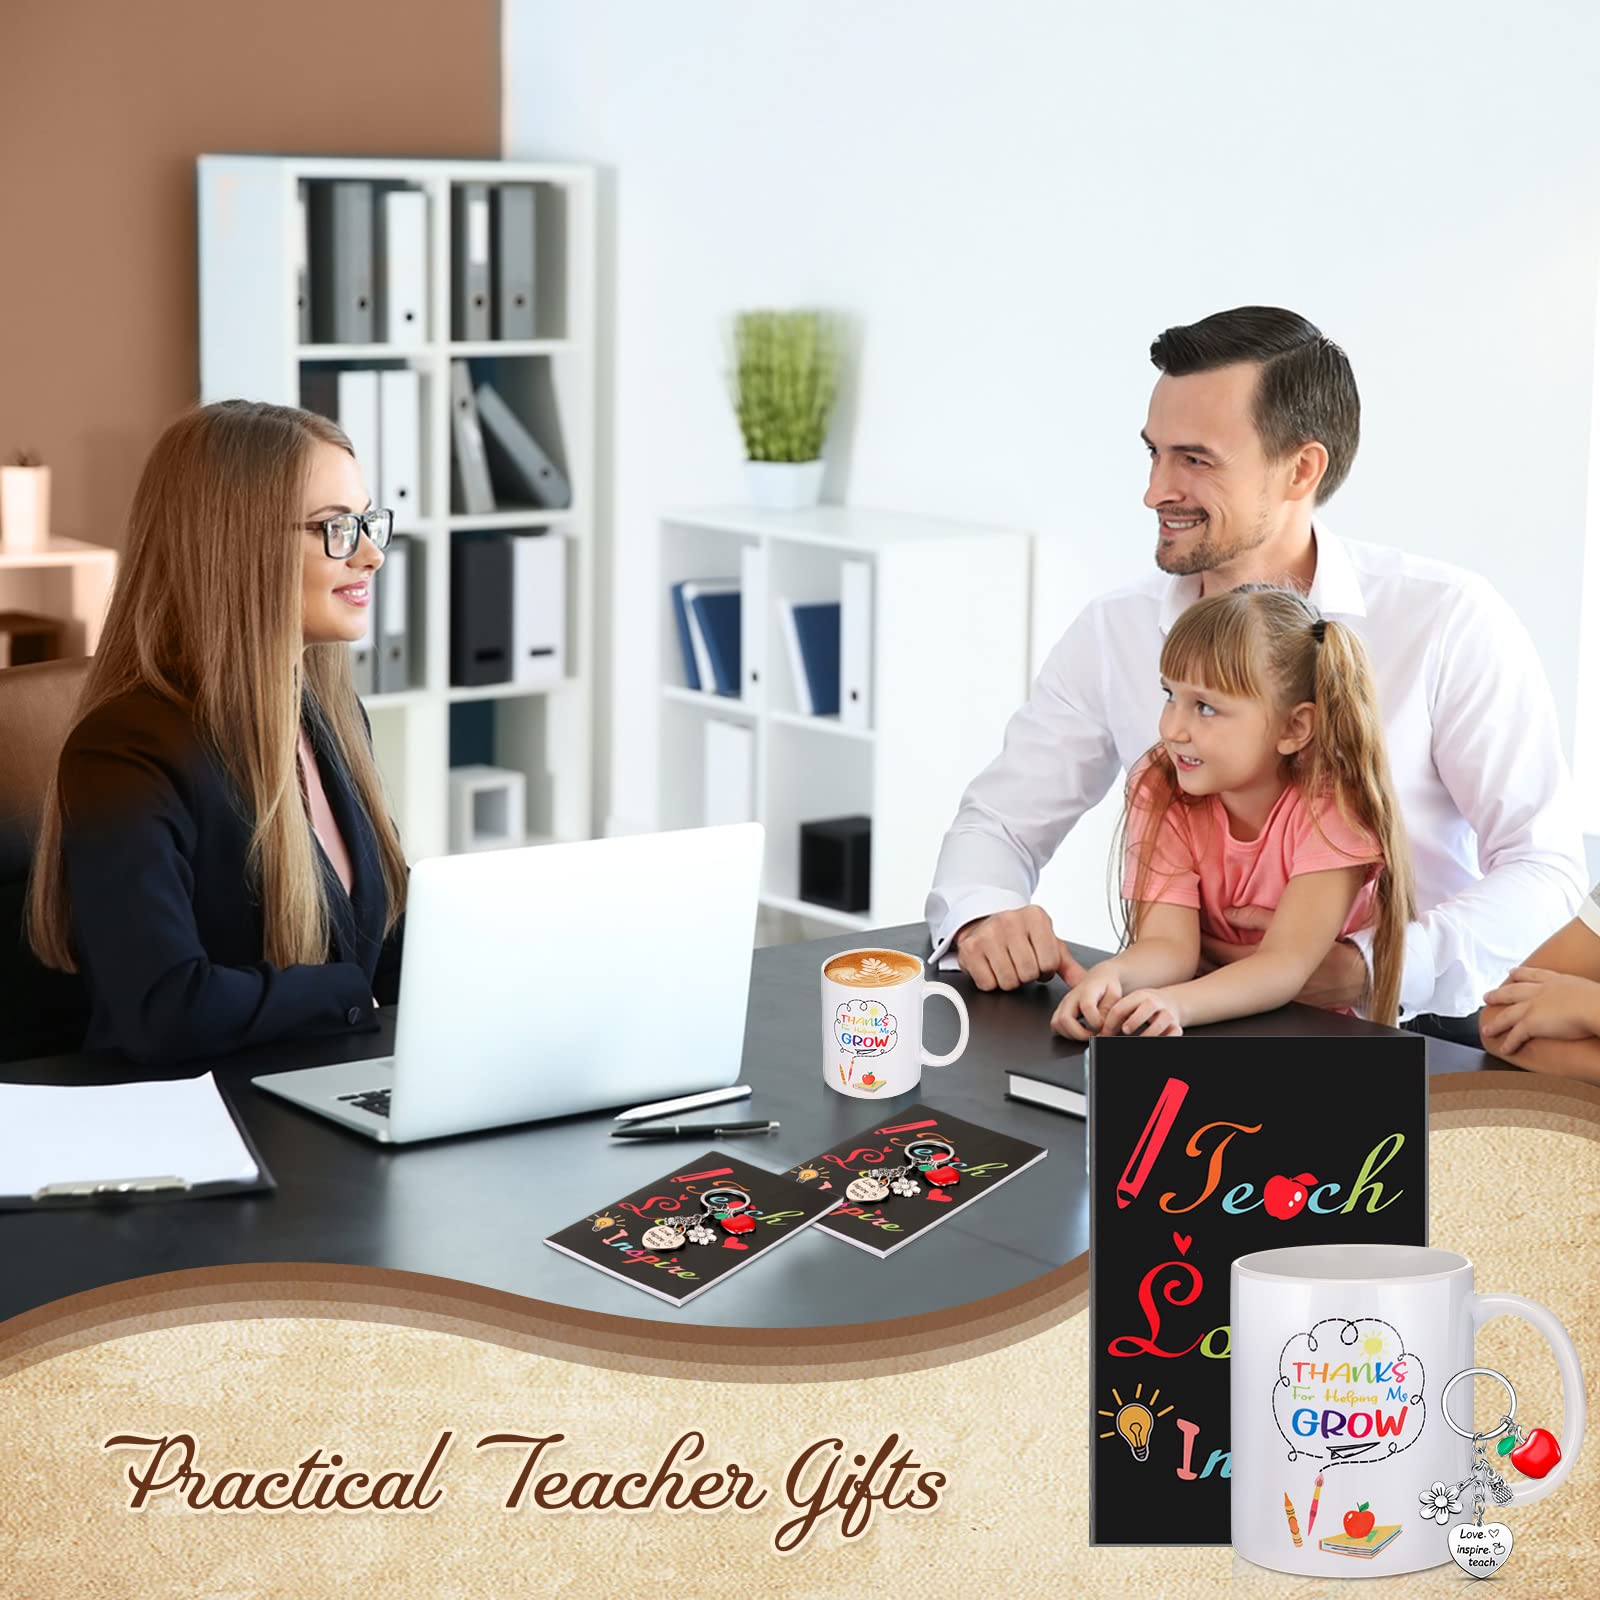 Baderke 6 Pieces Teacher Appreciation Gifts Sets Teacher Gifts Thank You Gifts for Women Include 2 Teacher Coffee Mug Cups 2 Keychains and 2 Mini Notepads Teacher Gifts for Women